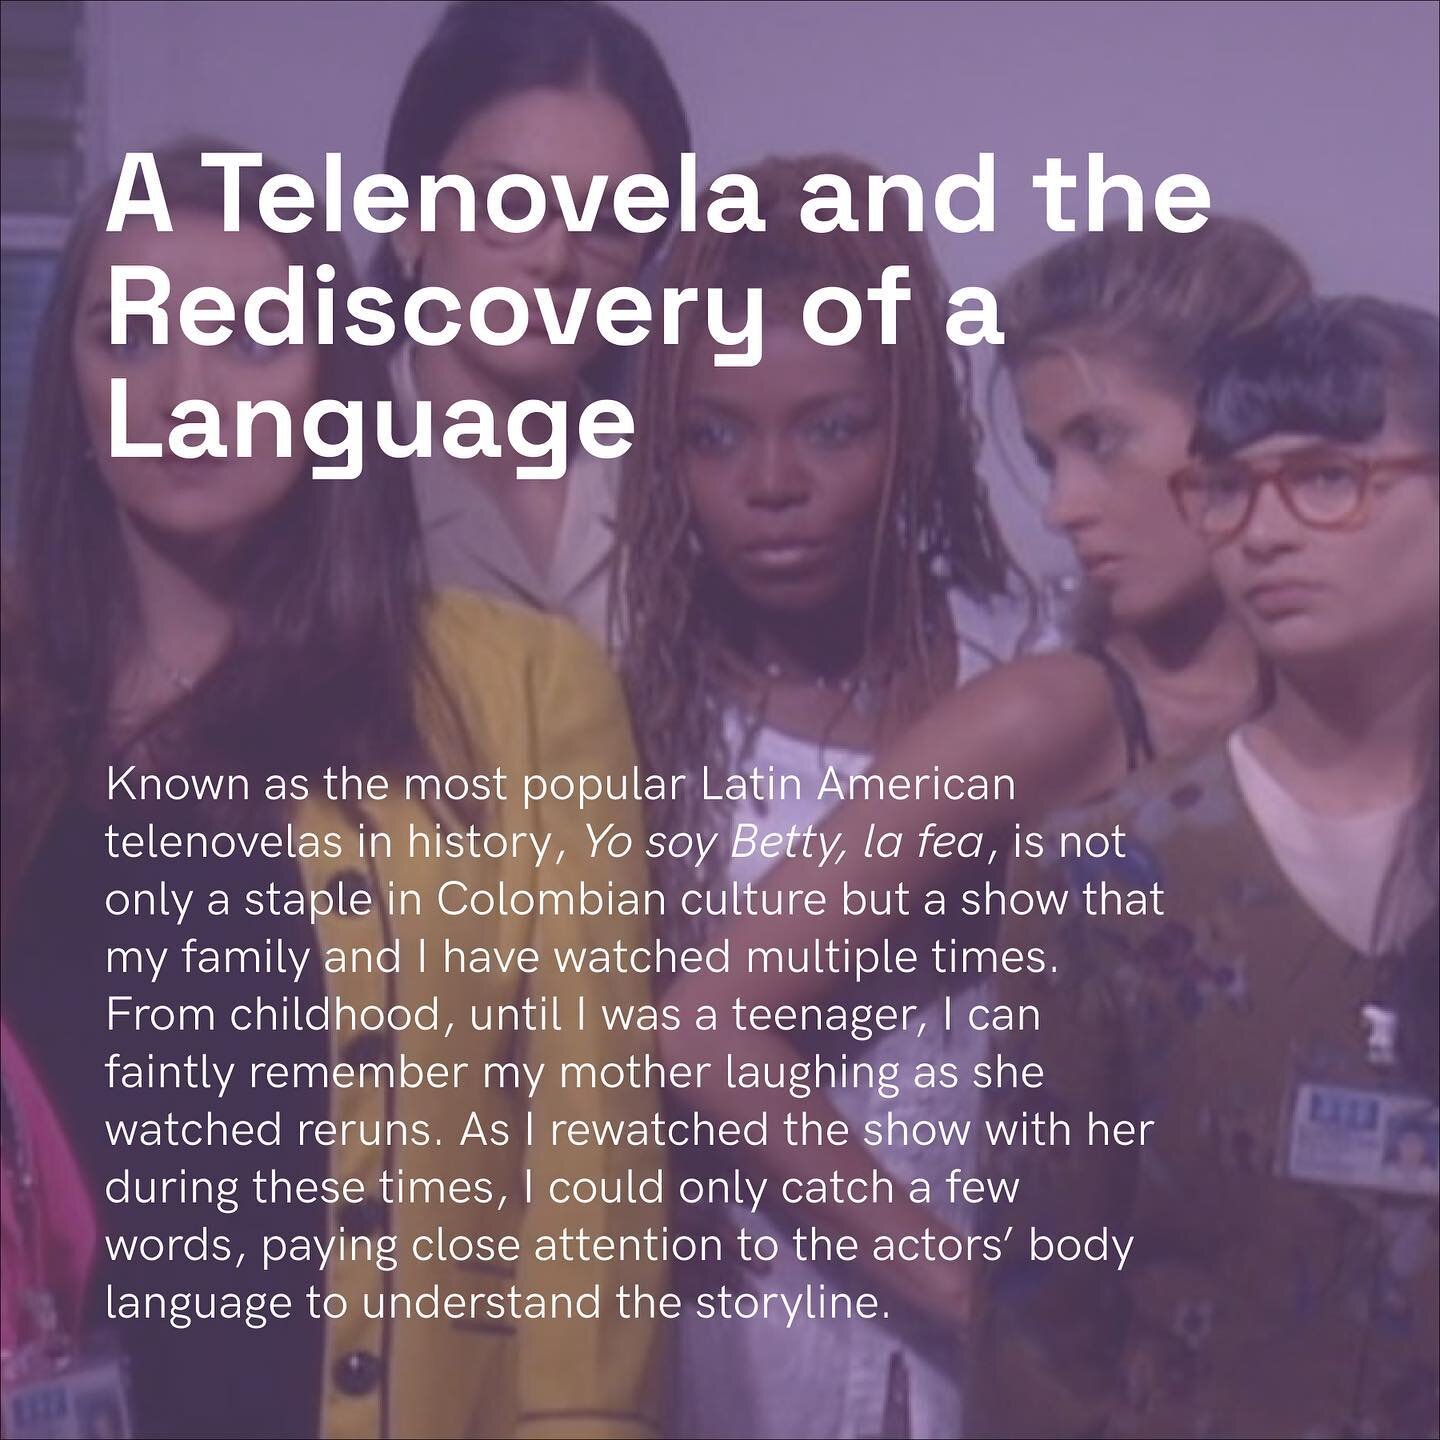 In @samanthalsoria&rsquo;s debut article for Sunstroke, &lsquo;A Telenovela and the Rediscovery of a Language&rsquo;, she writes about telenovelas being a staple in her childhood, particularly &lsquo;Yo soy Betty, la fea&rsquo;, which helped her redi